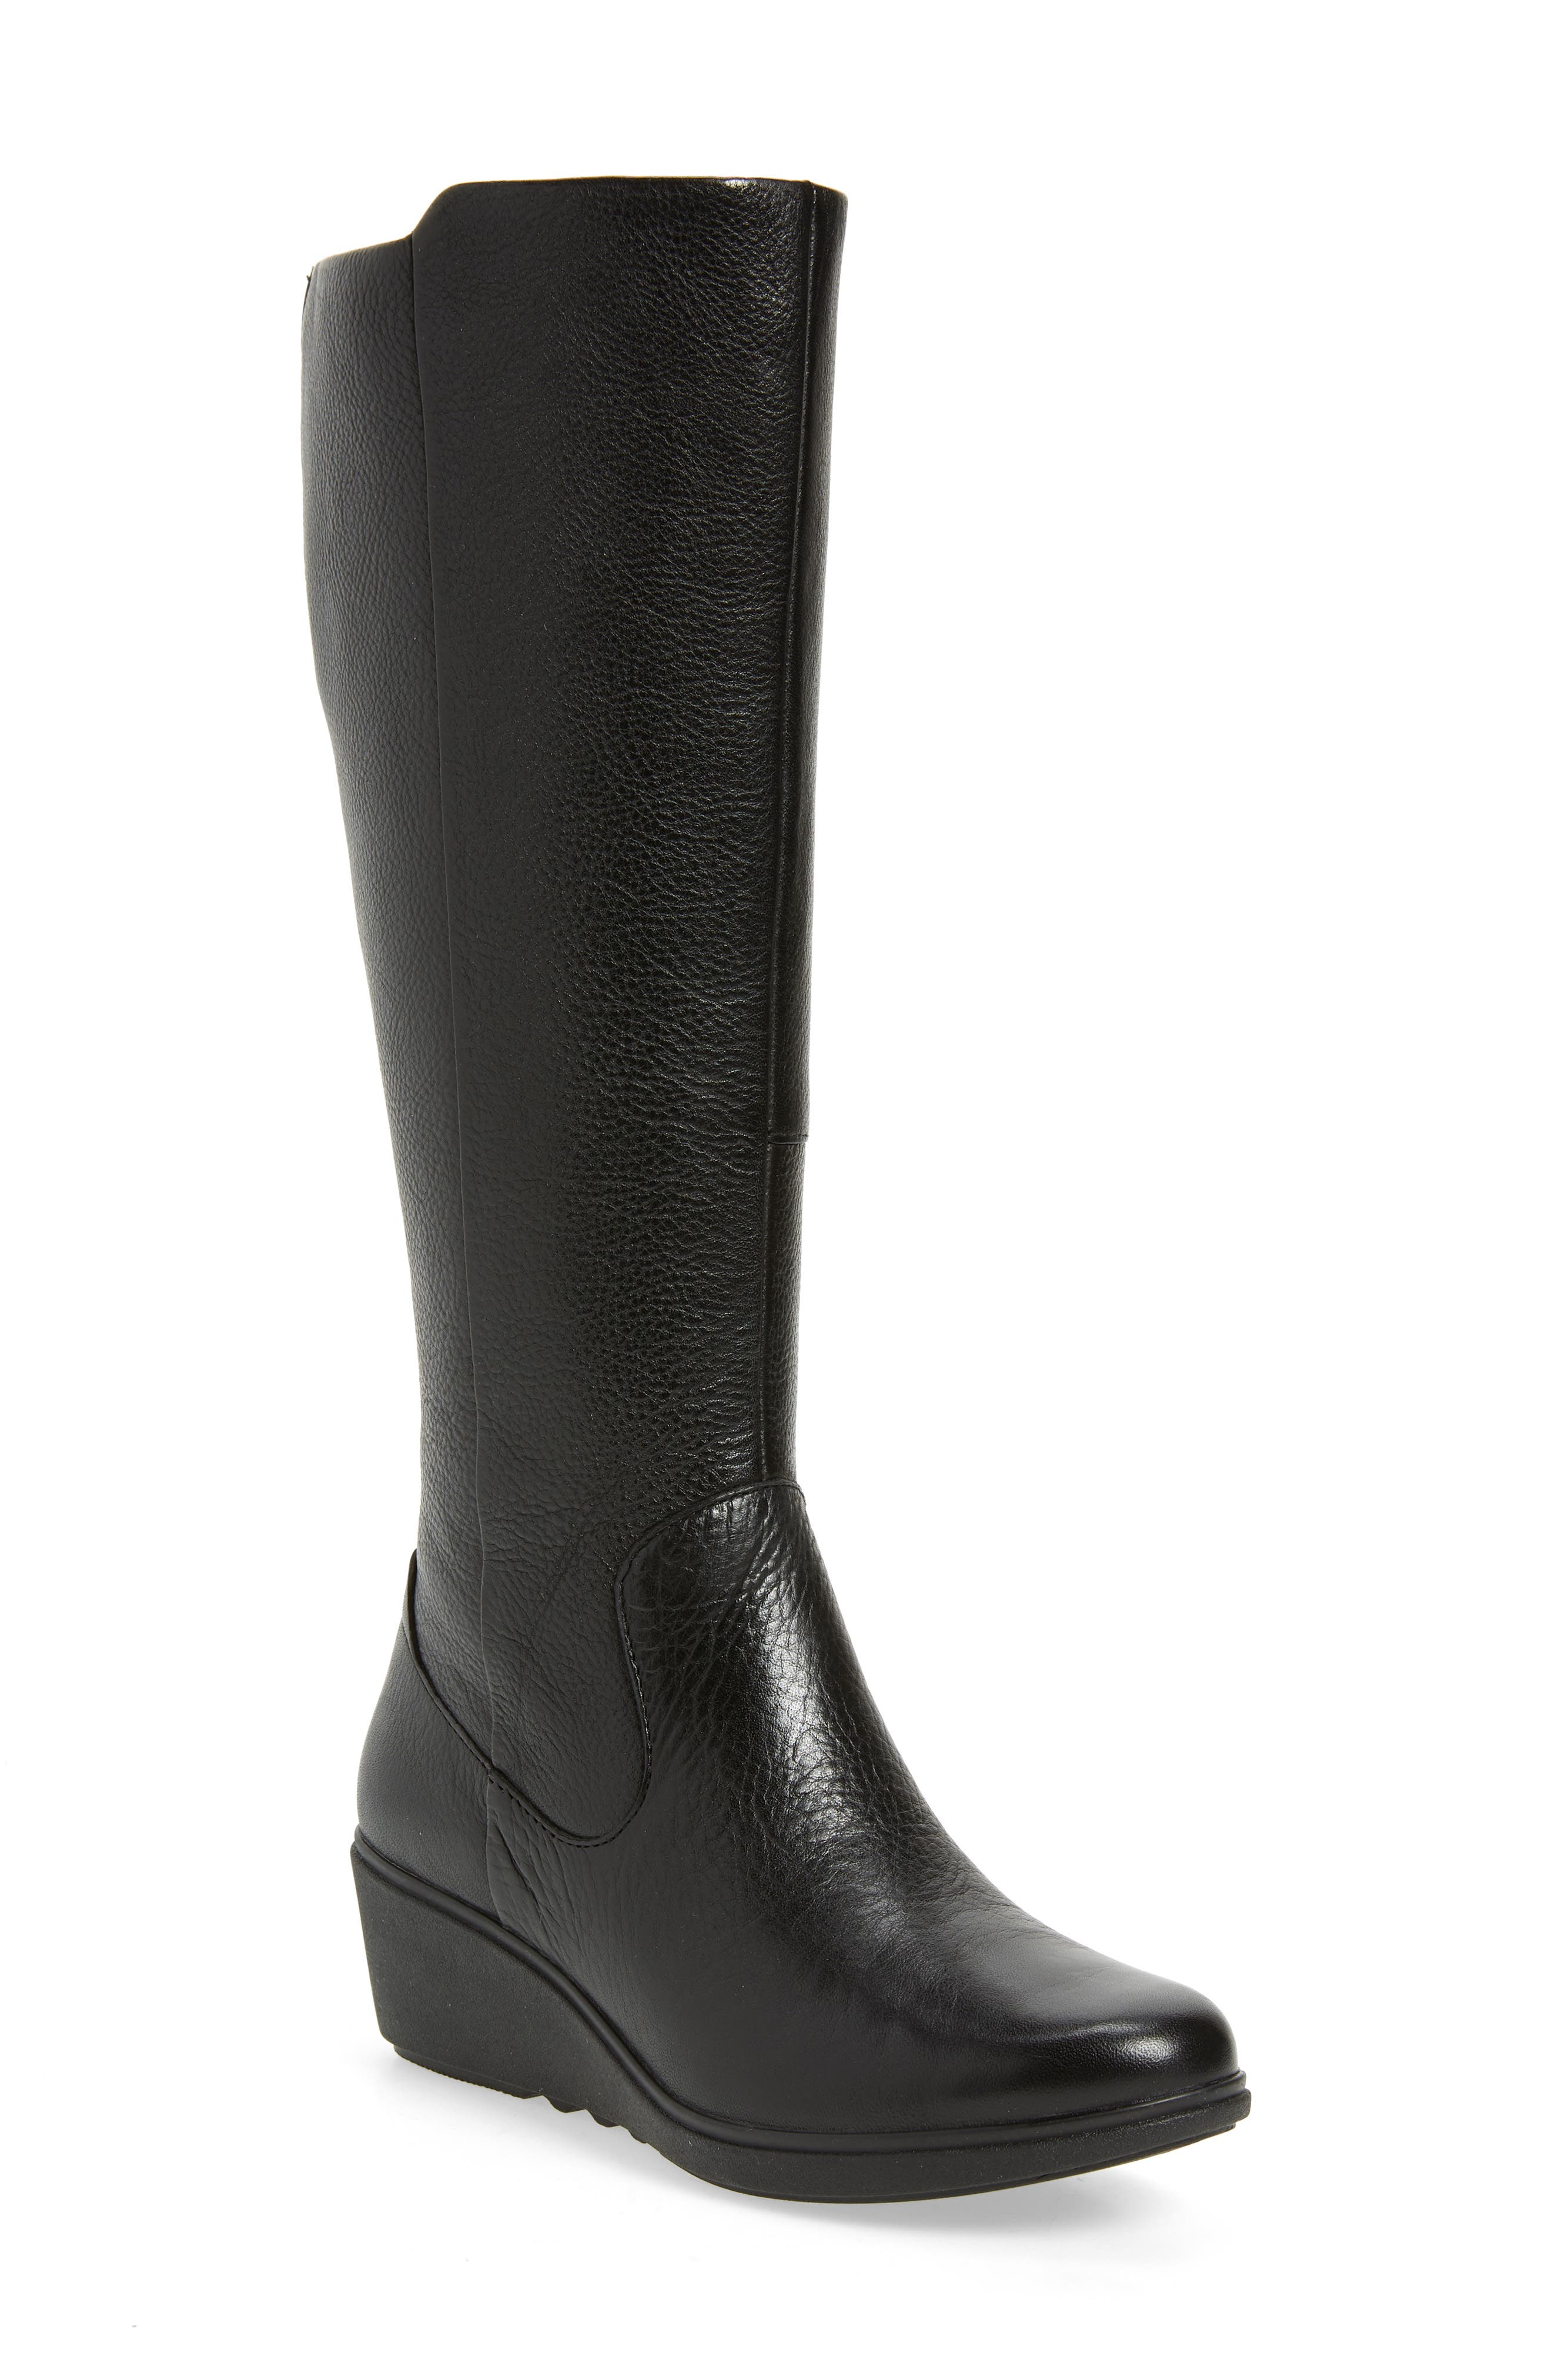 clarks womens wedge boots